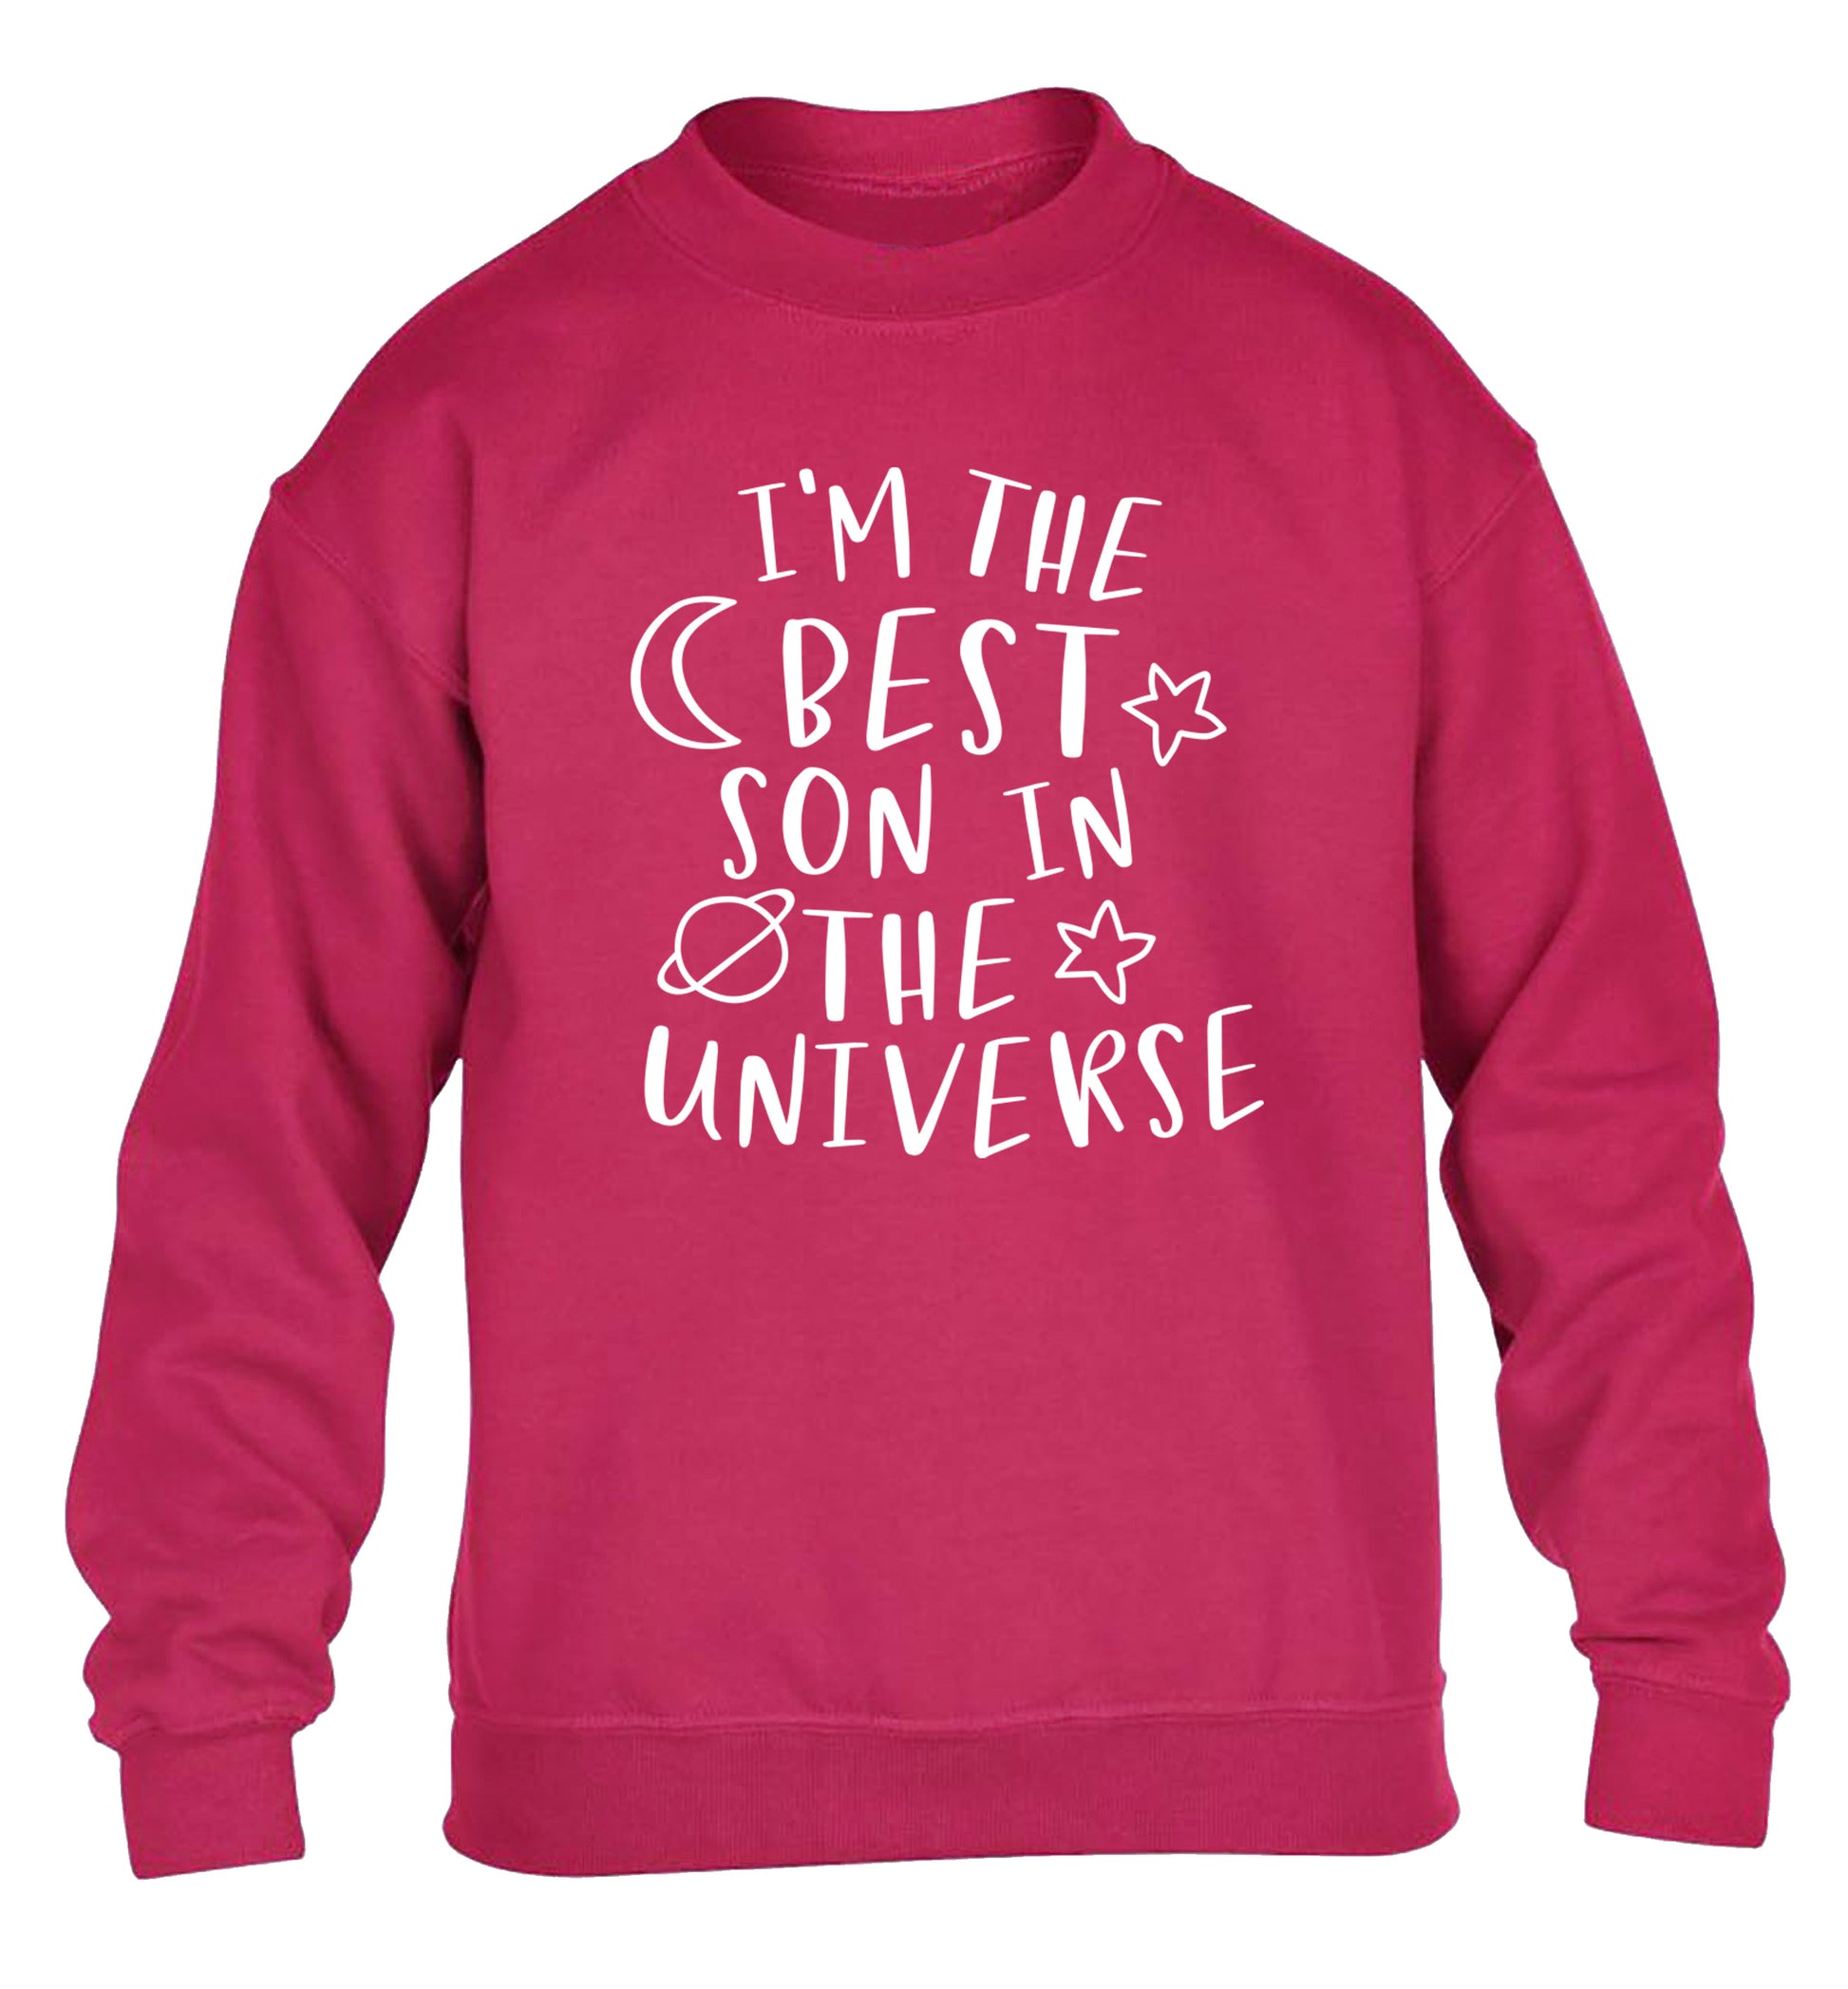 I'm the best son in the universe children's pink sweater 12-13 Years